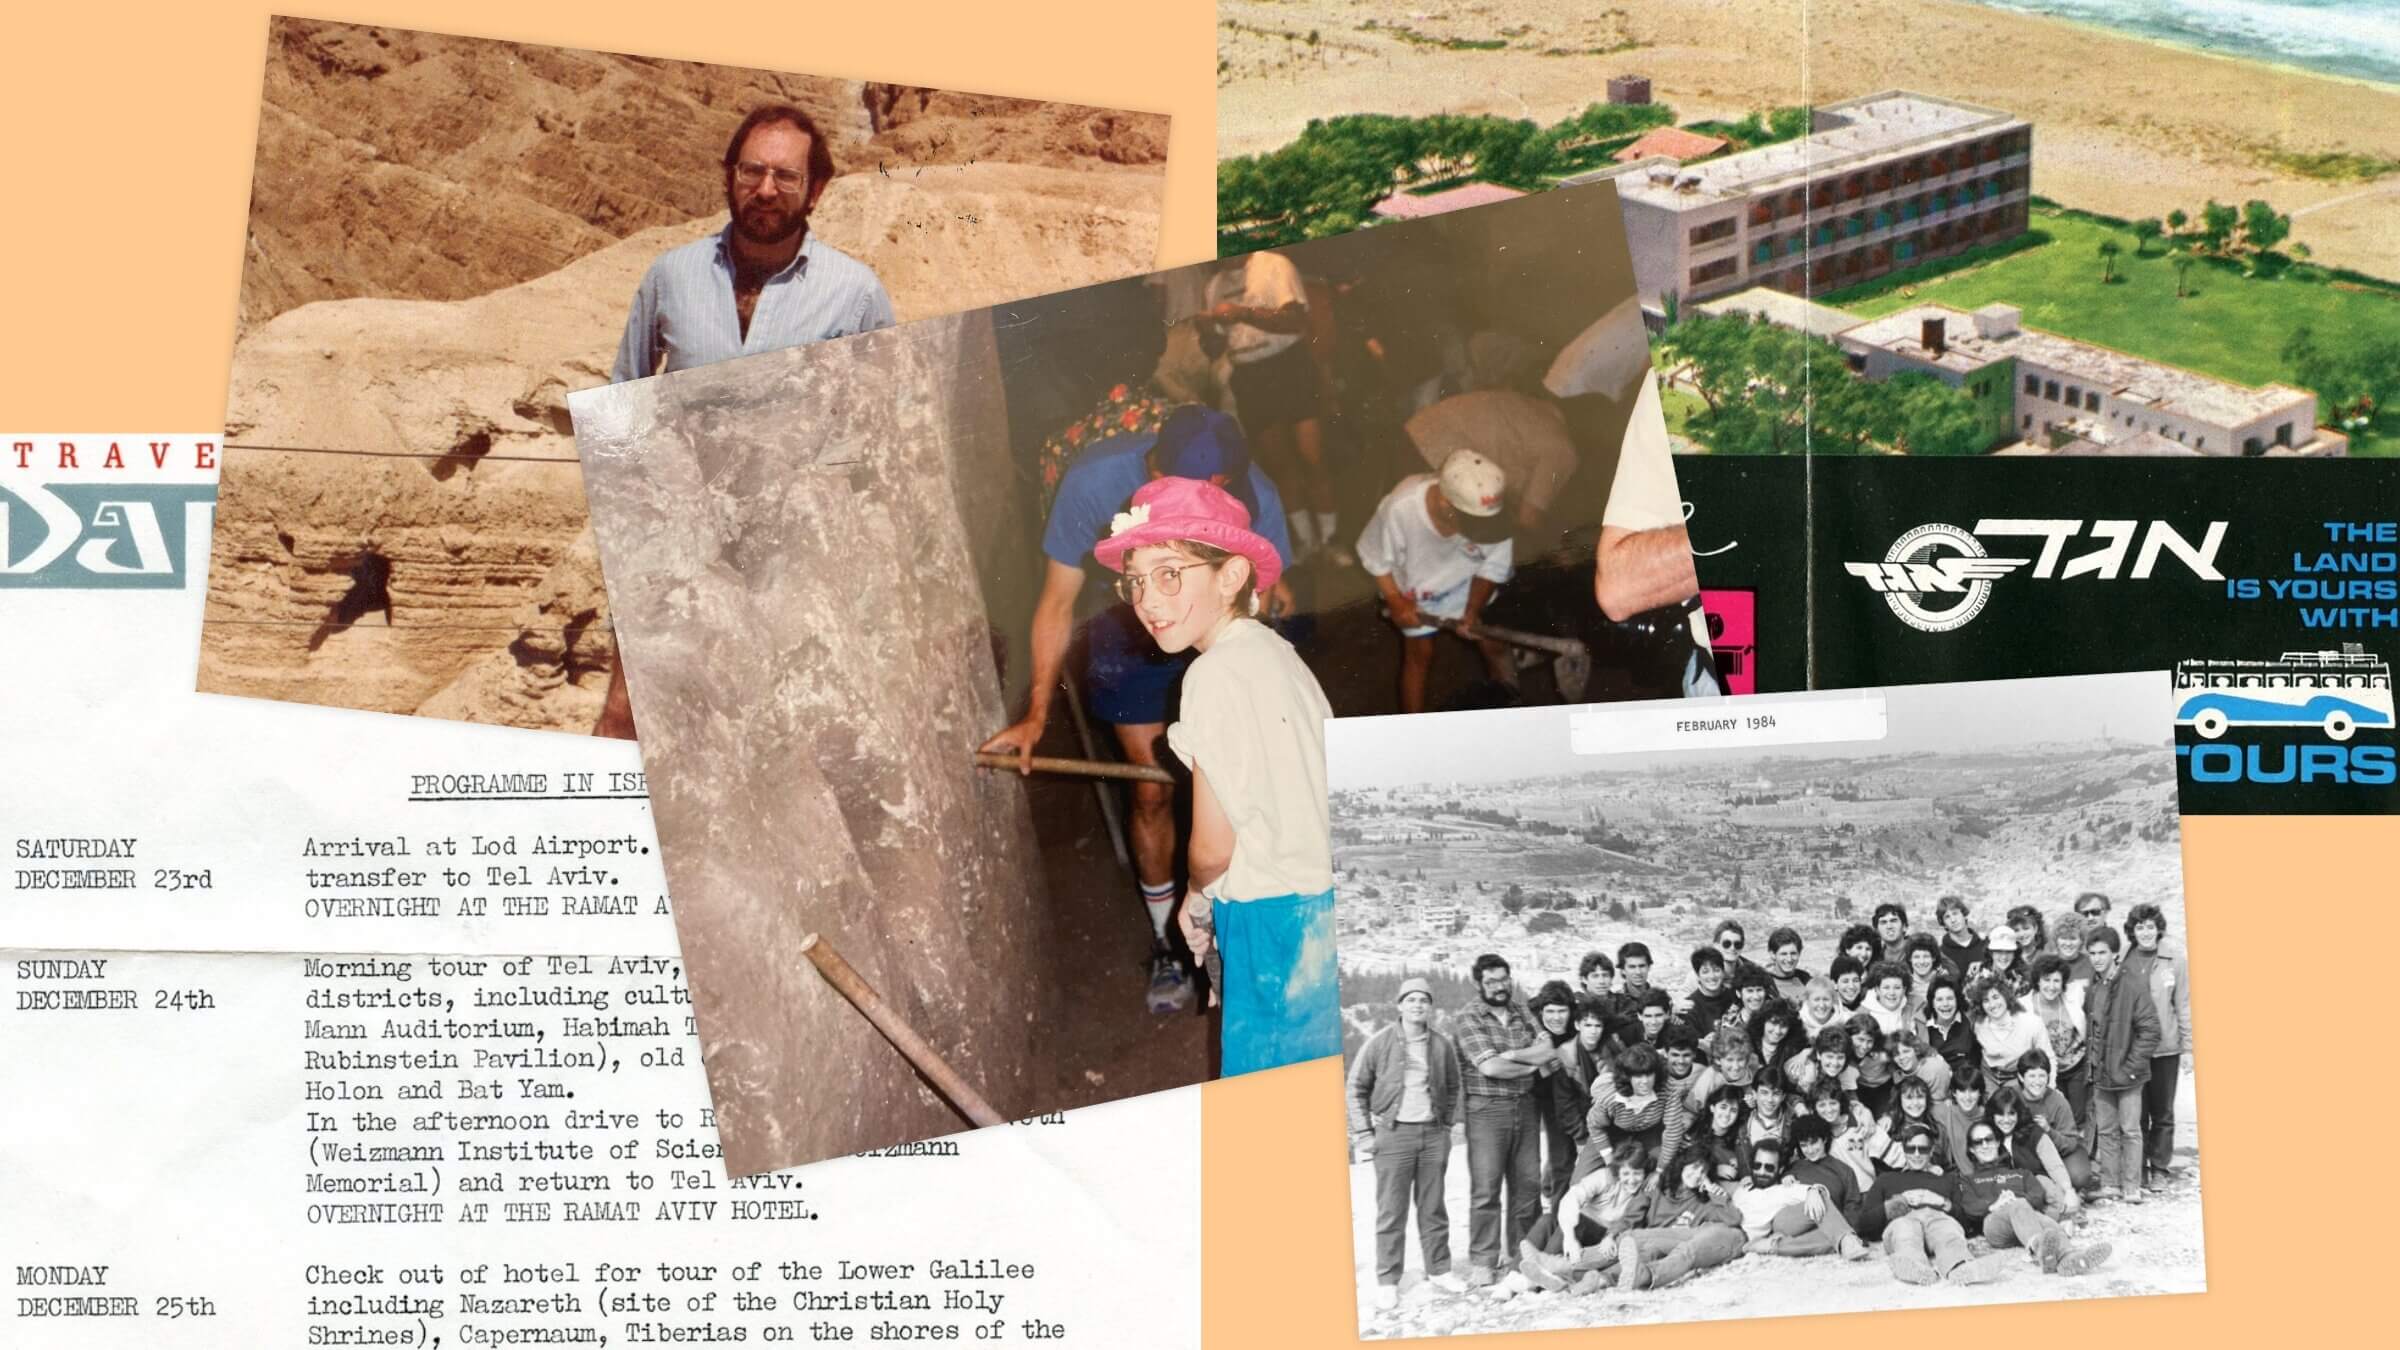 Readers sent in their memories and photographs of their first trips to Israel.